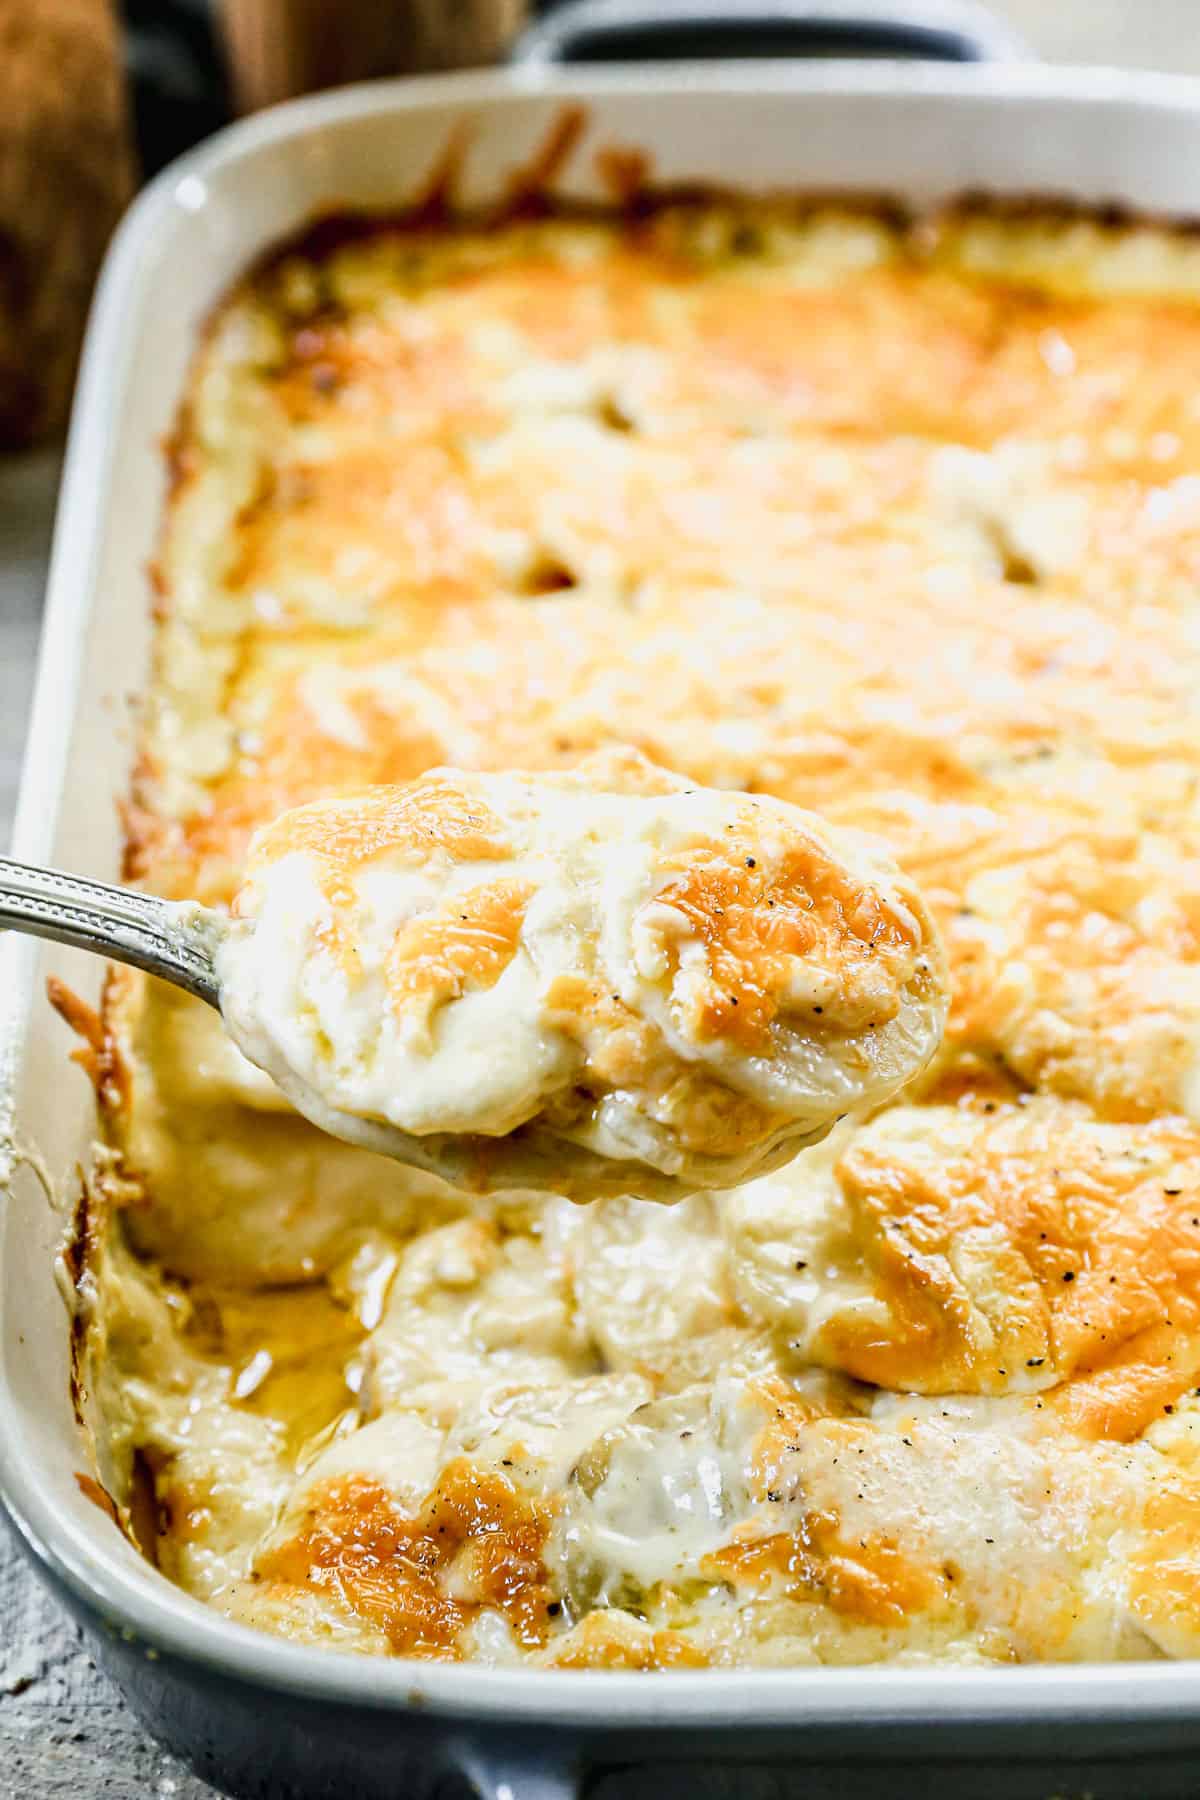 Hot and cheesy Potatoes Au Gratin, with some of it being lifted on a spoon.